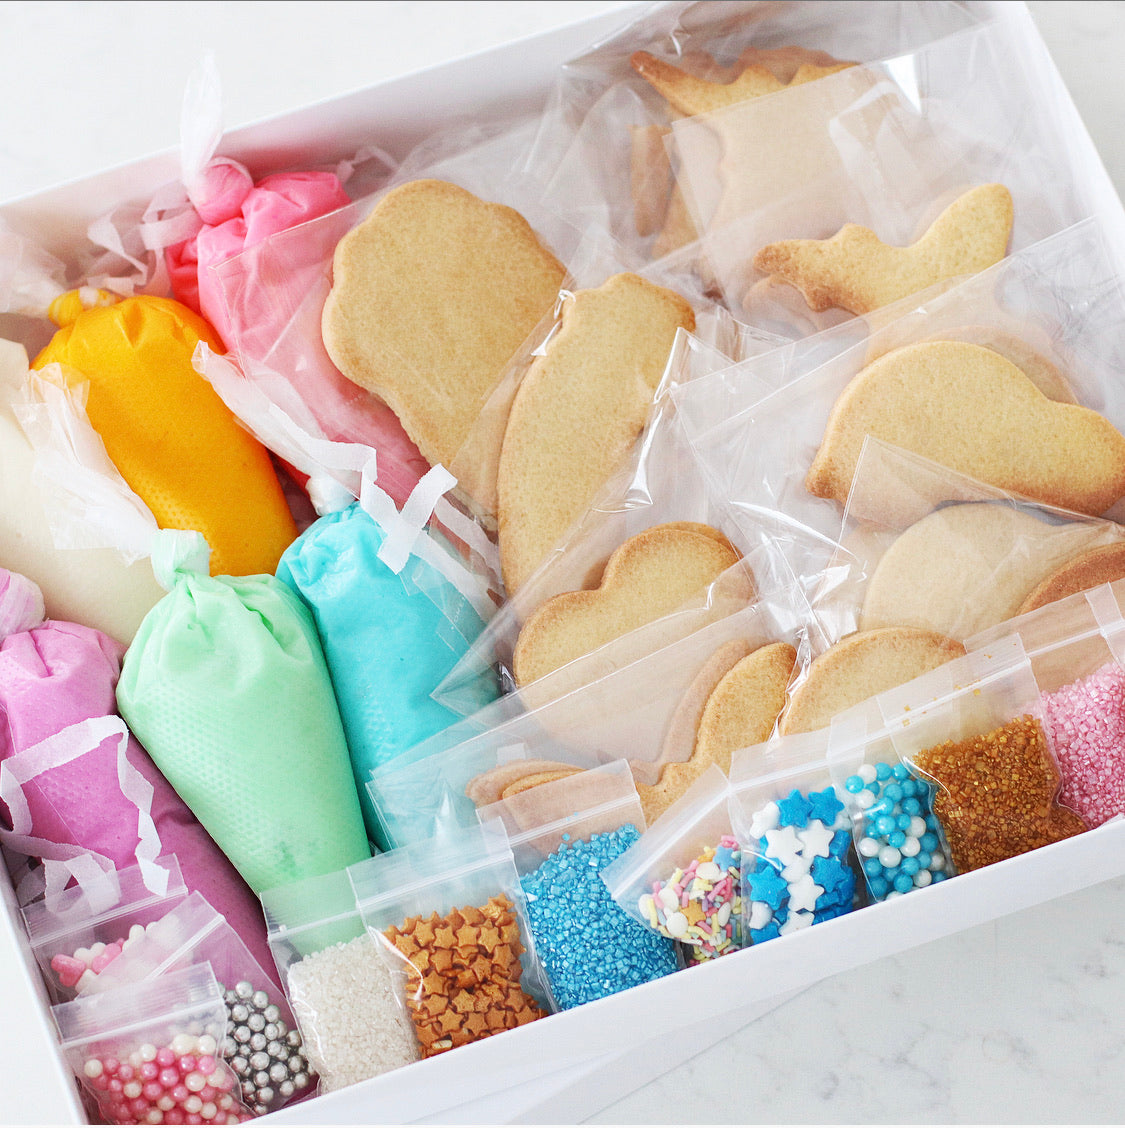 The Ultra-Mega DIY Cookie Kit - Includes 6 Piping bags, filled with ready to use icing in Blue, Purple, Pink, White, Yellow & Green.  10 Bags of sprinkles/decorations  20 Cookies, ready to decorate. Cookie shapes will include a mixed selection of all of our kits.